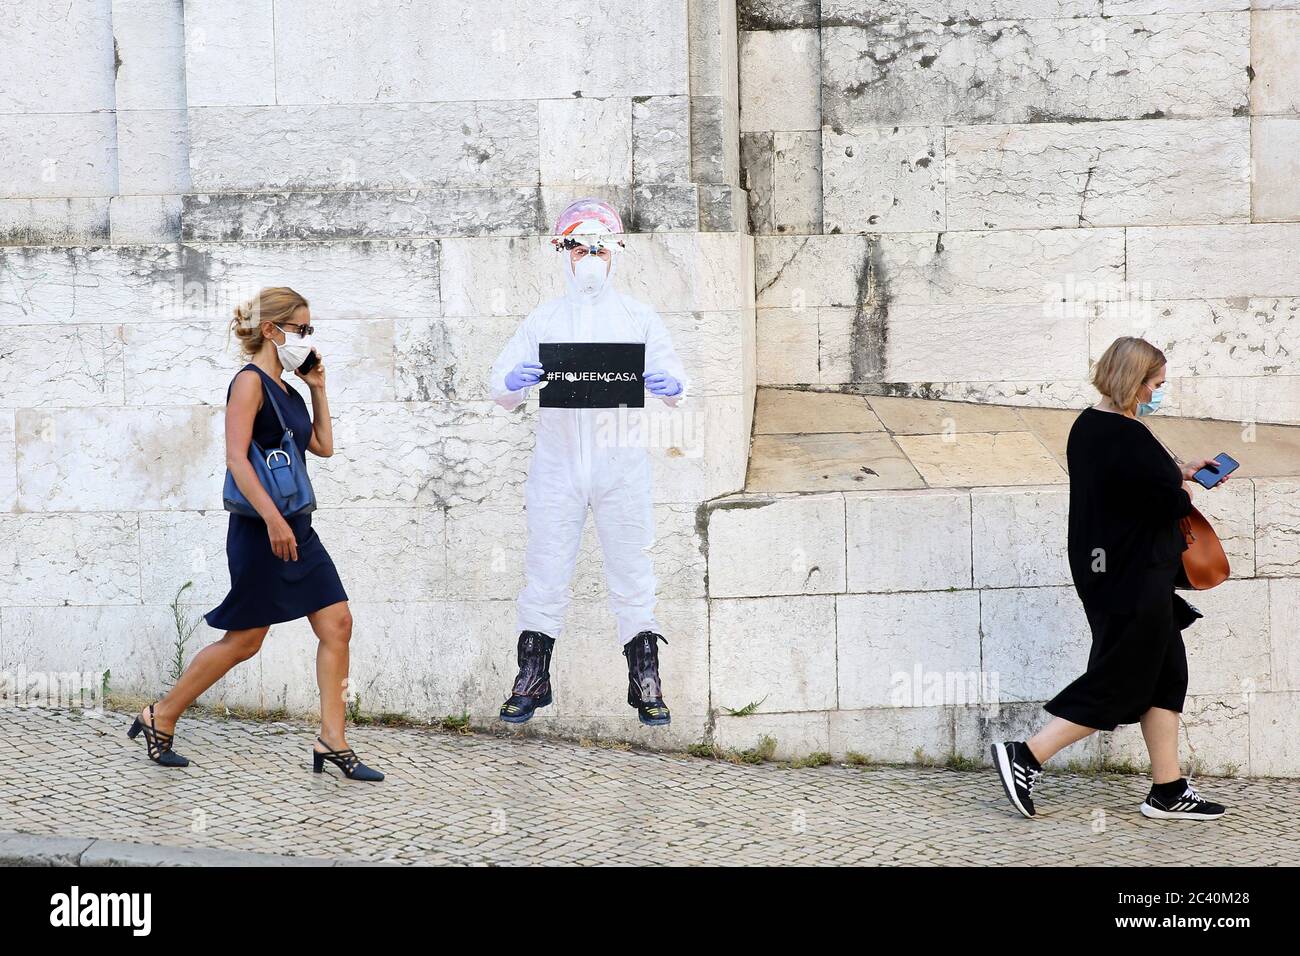 June 23, 2020, Lisbon, Portugal: People wearing face masks walk by a paper figure of a firefighter dressed in protective gear and holding a Ã”stay at homeÃ sign on a wall in Lisbon, Portugal, on June 23, 2020, during the COVID-19 Coronavirus pandemic. The Government applies today new mandatory confinement measures to the whole Lisbon metropolitan area, due to a significant increase in Covid-19 cases in recent weeks. Among the main restrictions is the return of the ban on gatherings with more than ten people, the strengthening of the supervision of shopping centres and the general closure of s Stock Photo